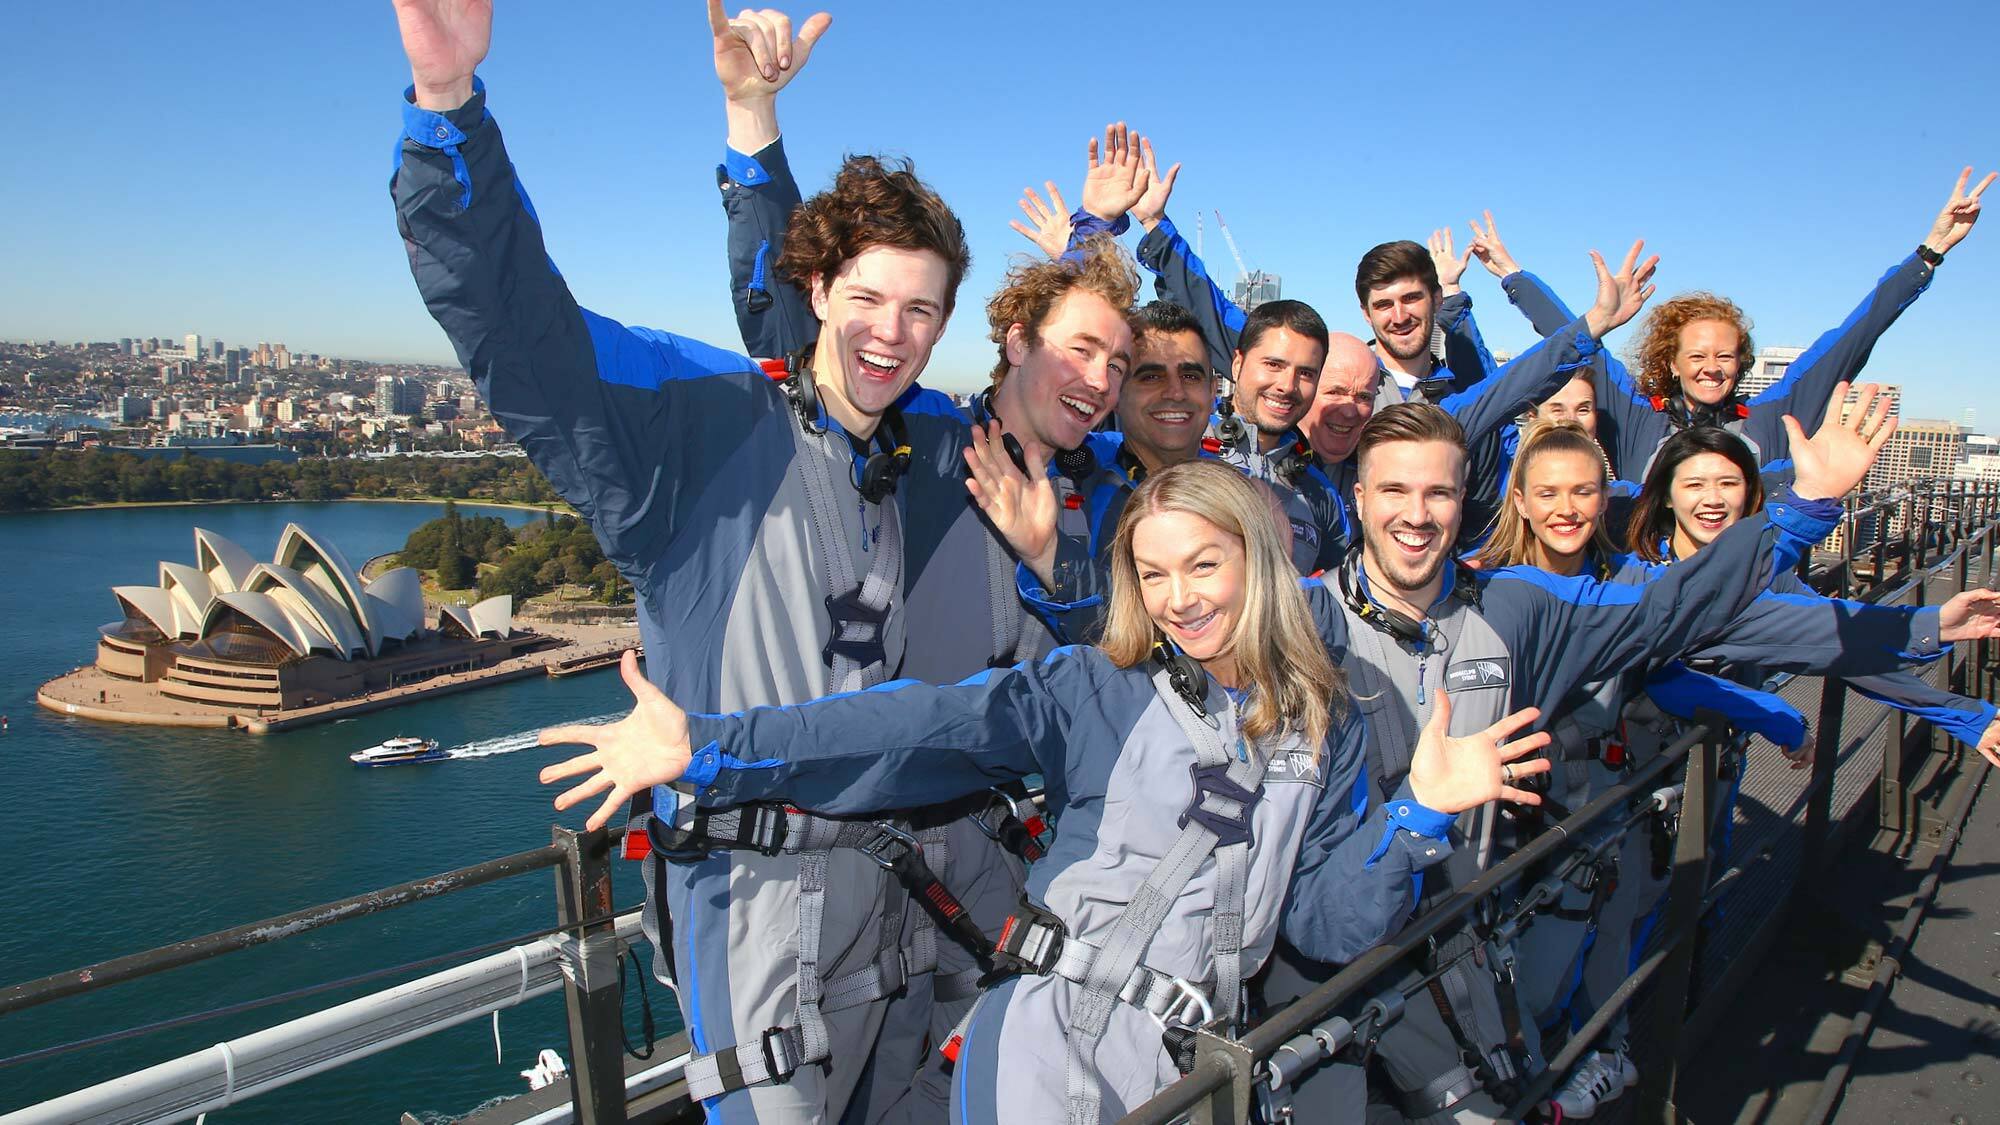 Bridgeclimb Sydney team and corporate events packages